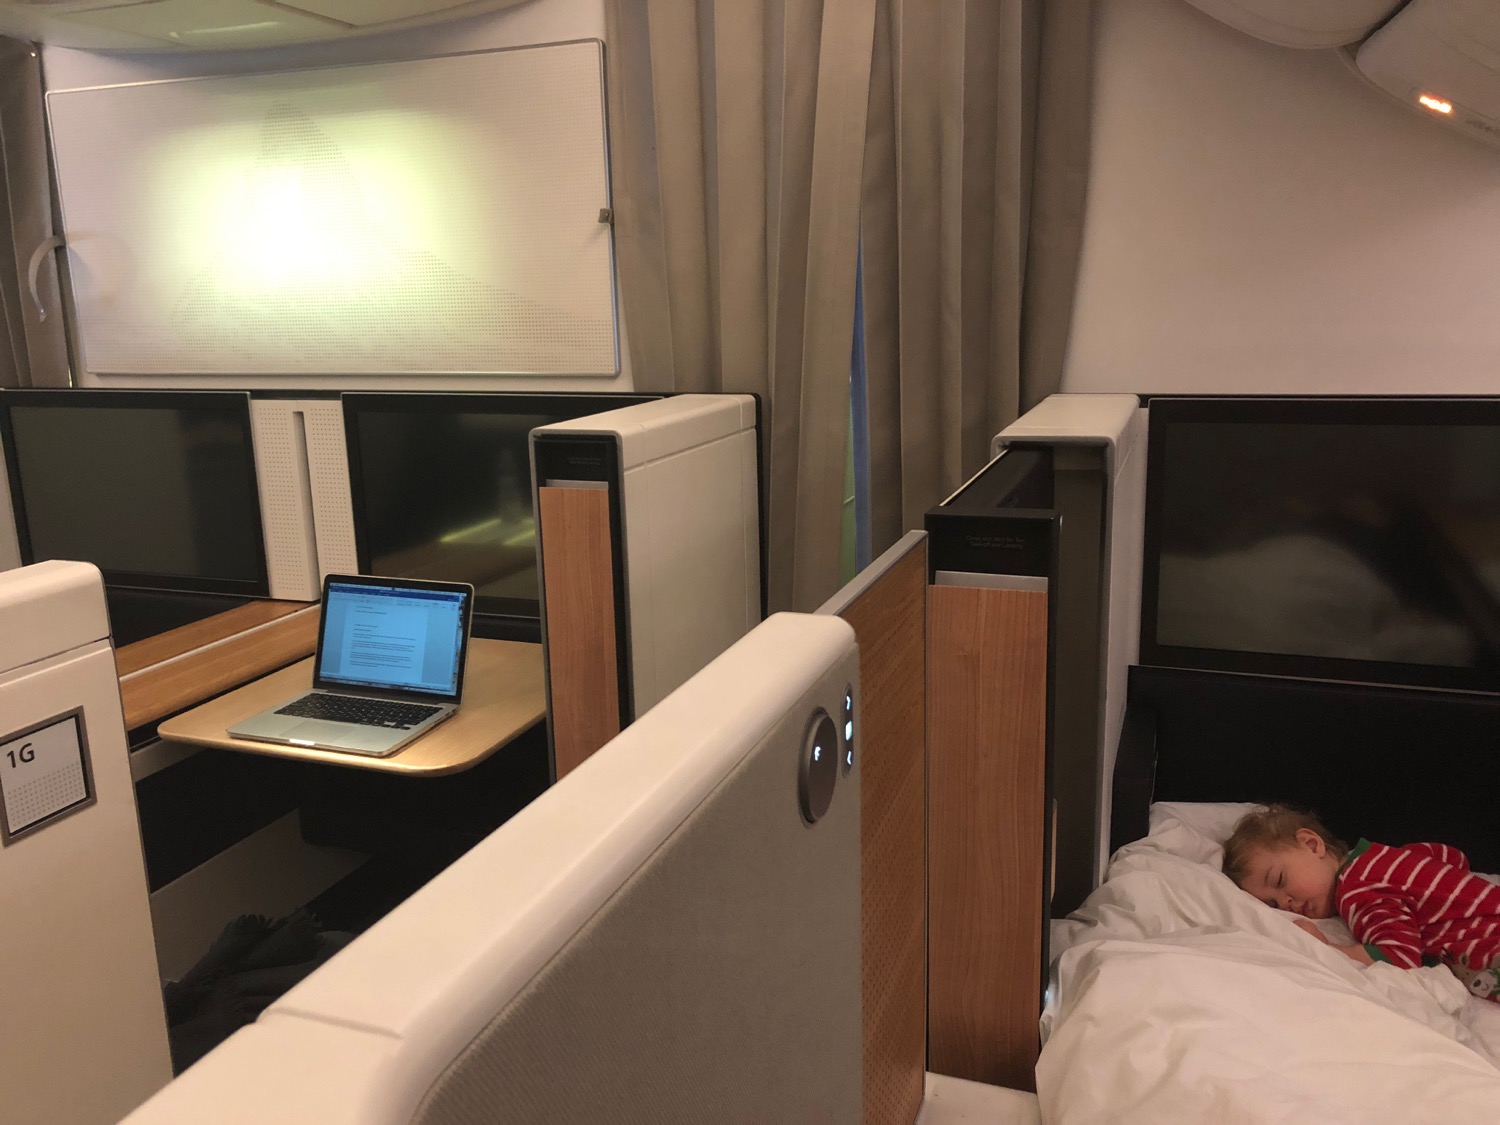 a child sleeping in a bed with a laptop on it